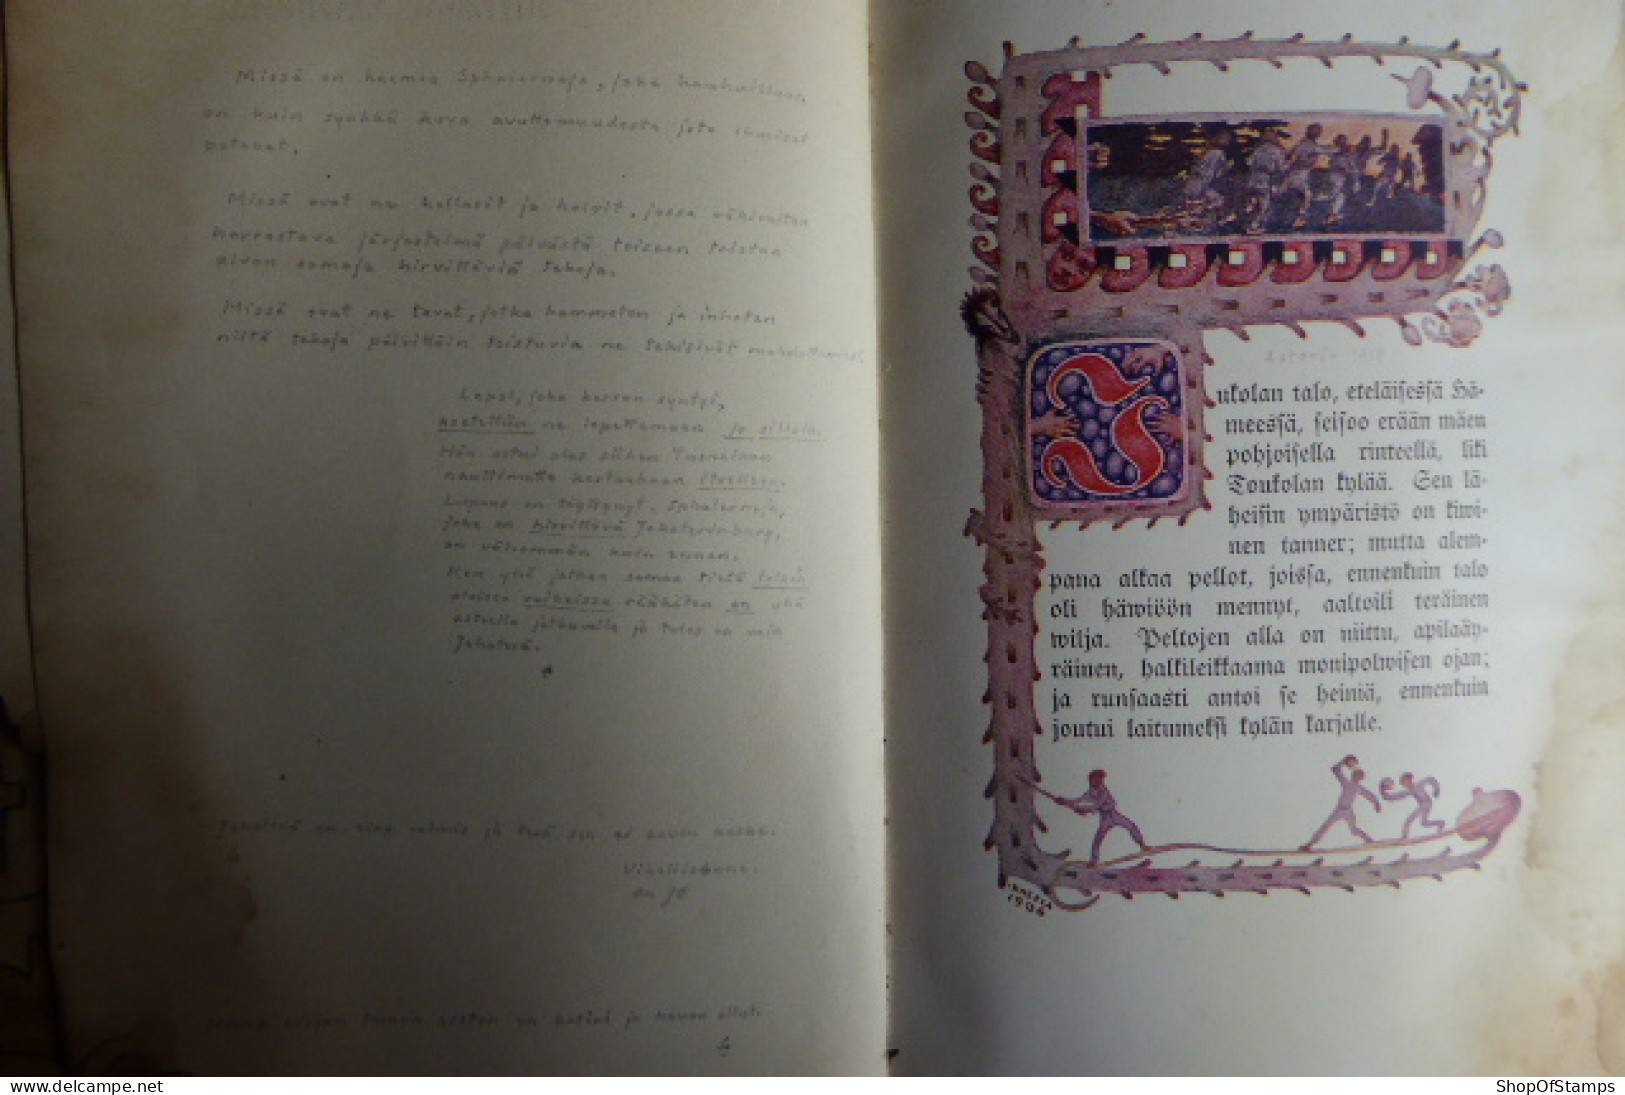 BOOK; SEITFEMAN WELJESTA FEW CORNERS BURNT BUT BOOK & TEXT IS FINE 1929 600 Pages Notes By Reader - Scandinavian Languages